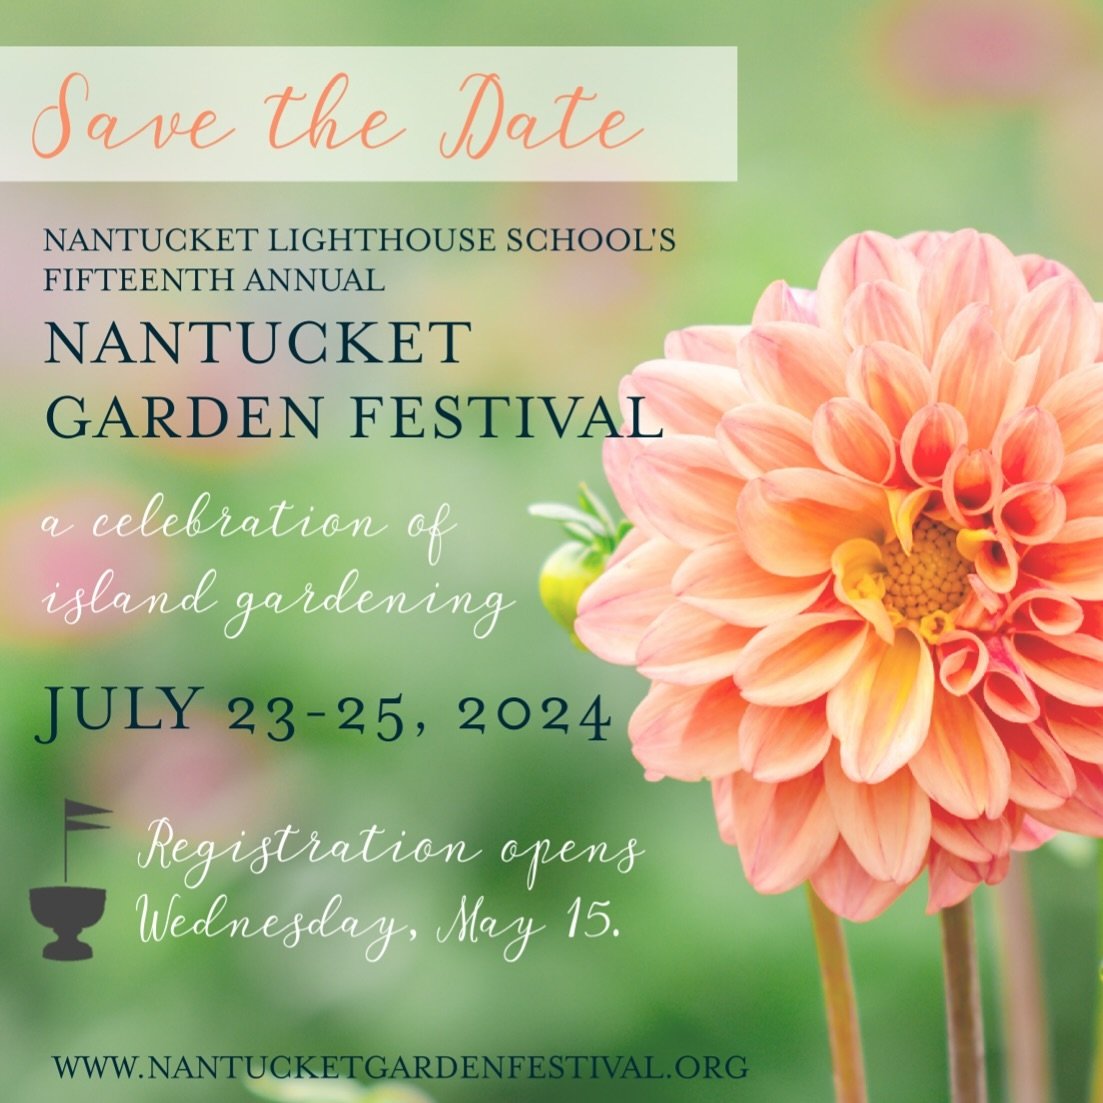 Mark your calendars and let nature&rsquo;s beauty unfold! 🌸
JULY 23-25, 2024

✨ Join us for the enchanting fifteenth edition of the Nantucket Garden Festival - where floral dreams come to life!

👉🏻Over the next few weeks we will be announcing our 